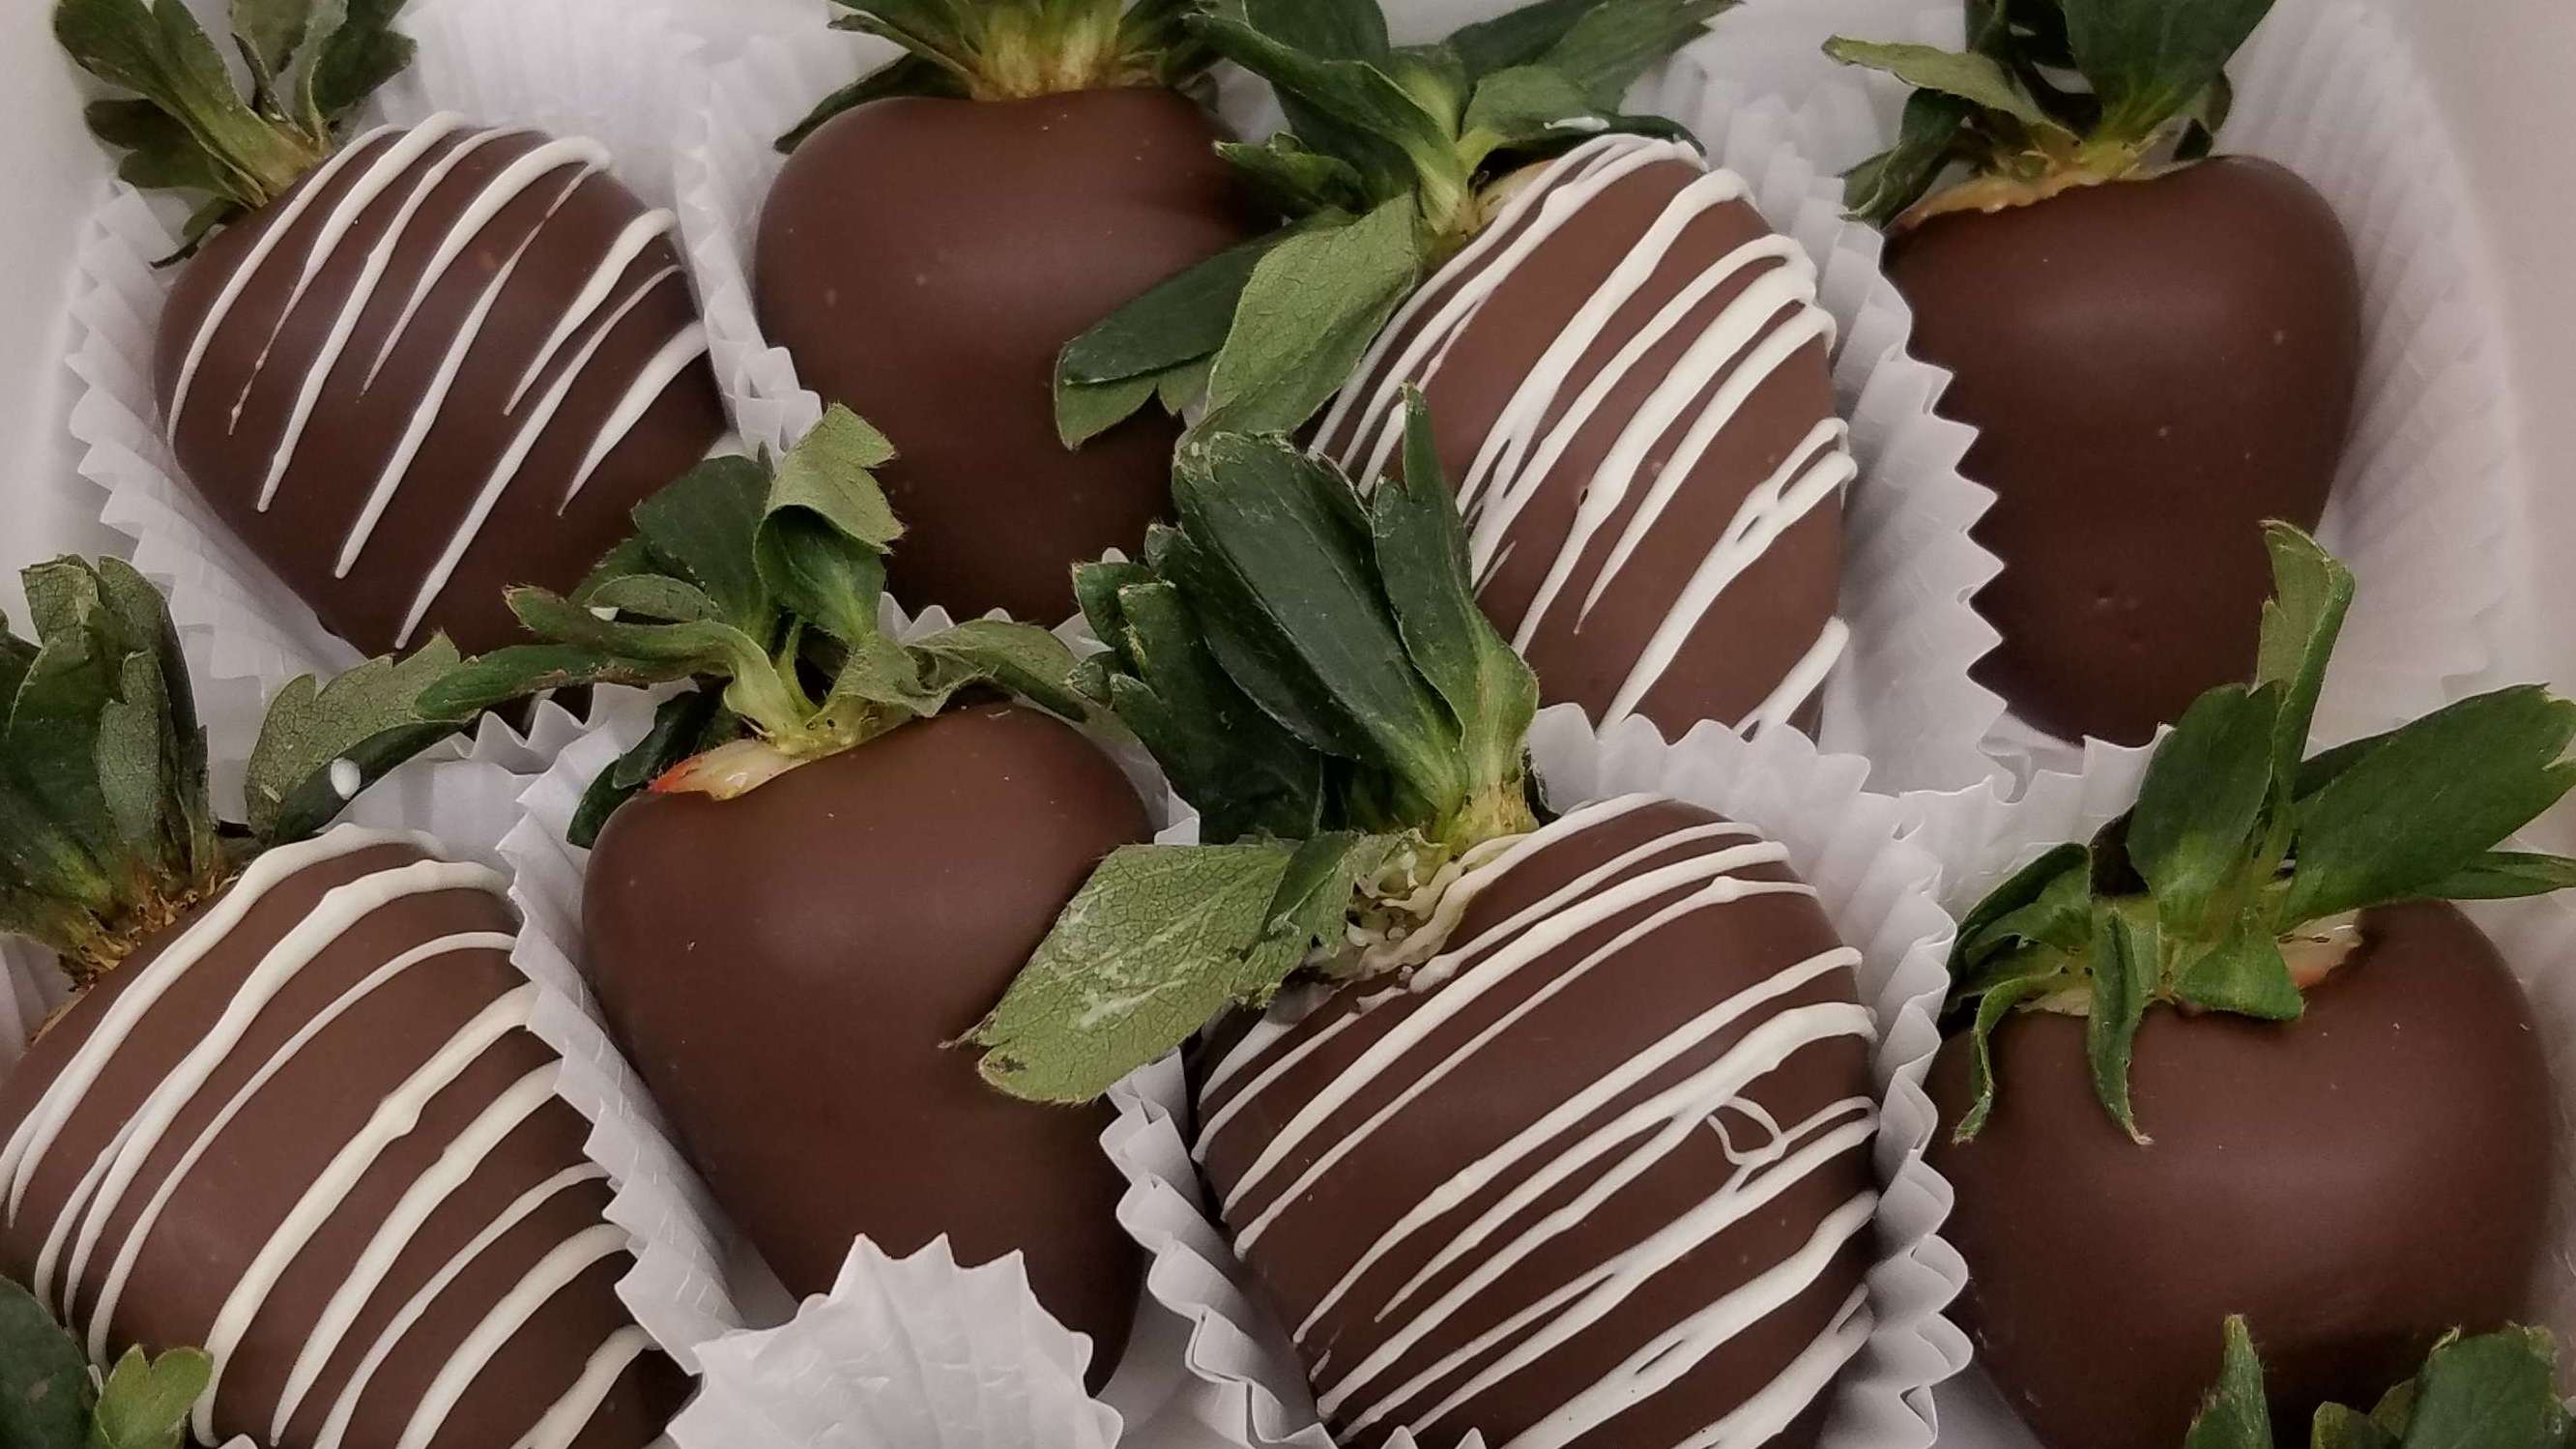 We've got you covered... Order chocolate covered strawberries, pretzels, cookies, fruit & gift baskets, fruit pies & more!